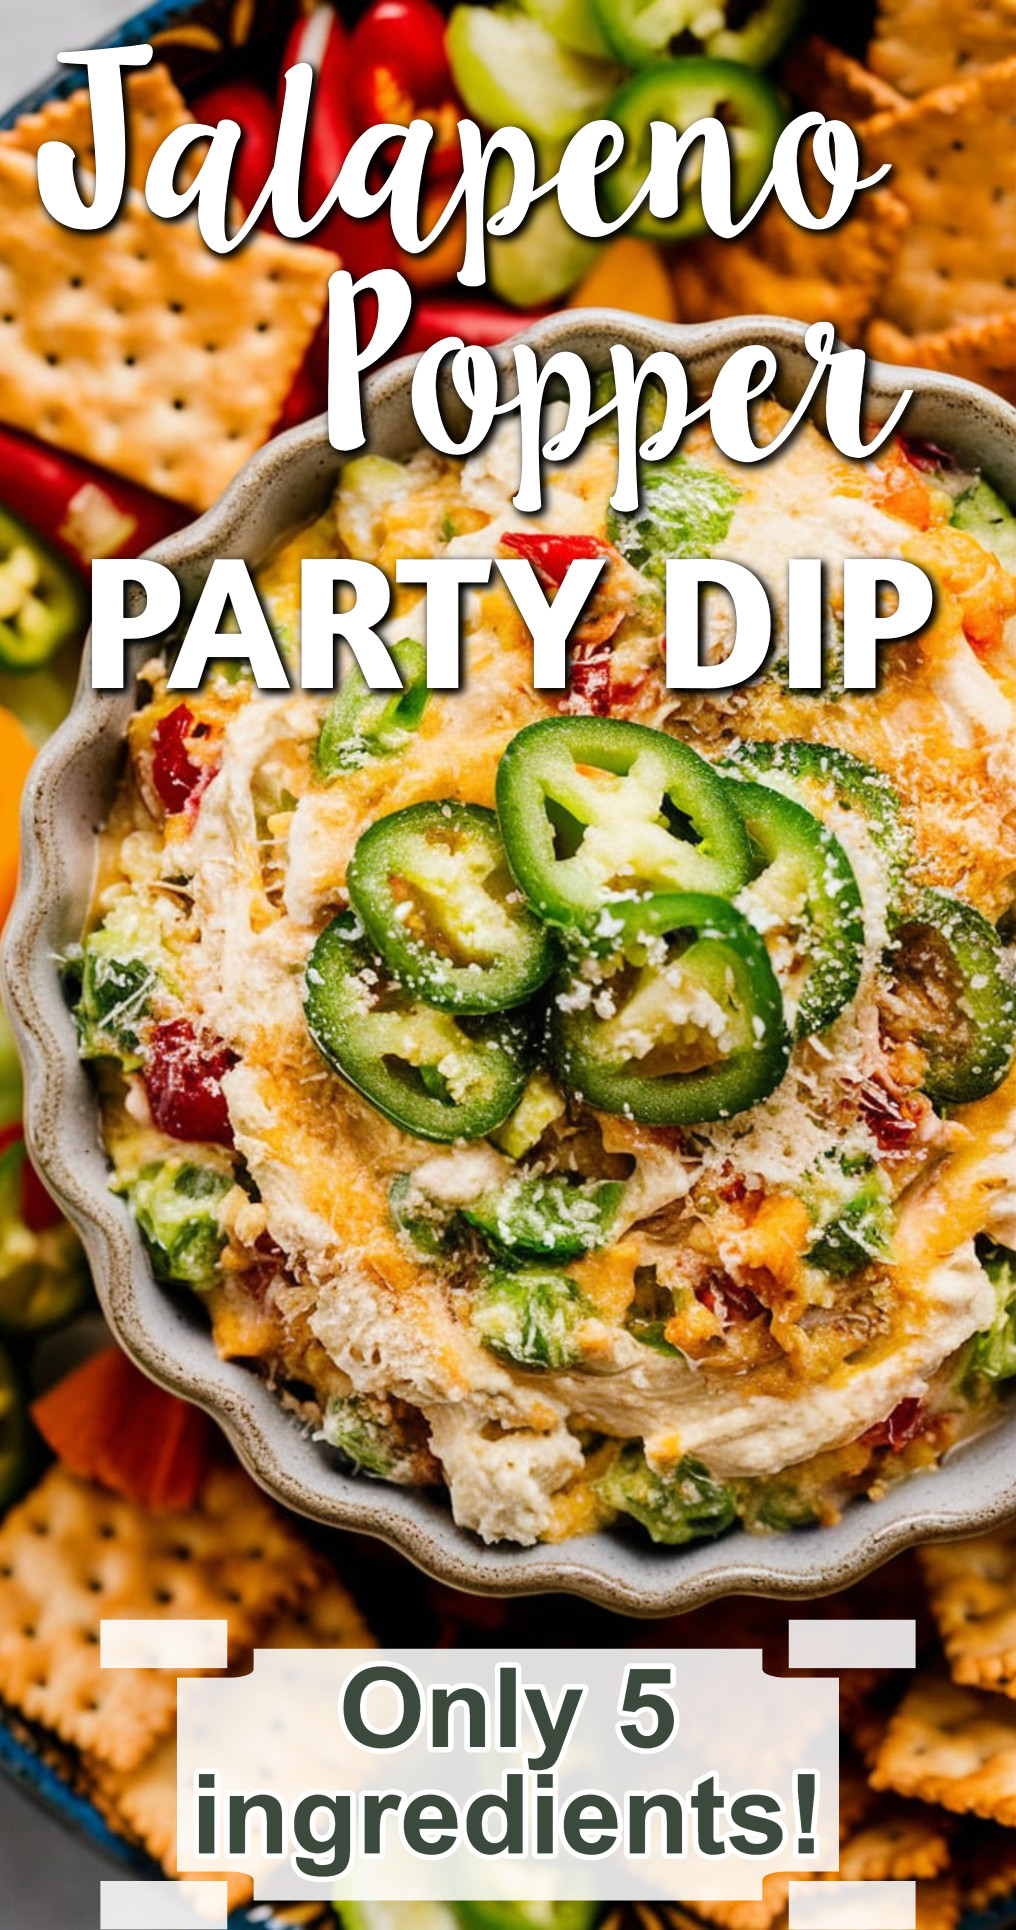 Best summer dips and appetizers jalapeno popper cracker dip recipe